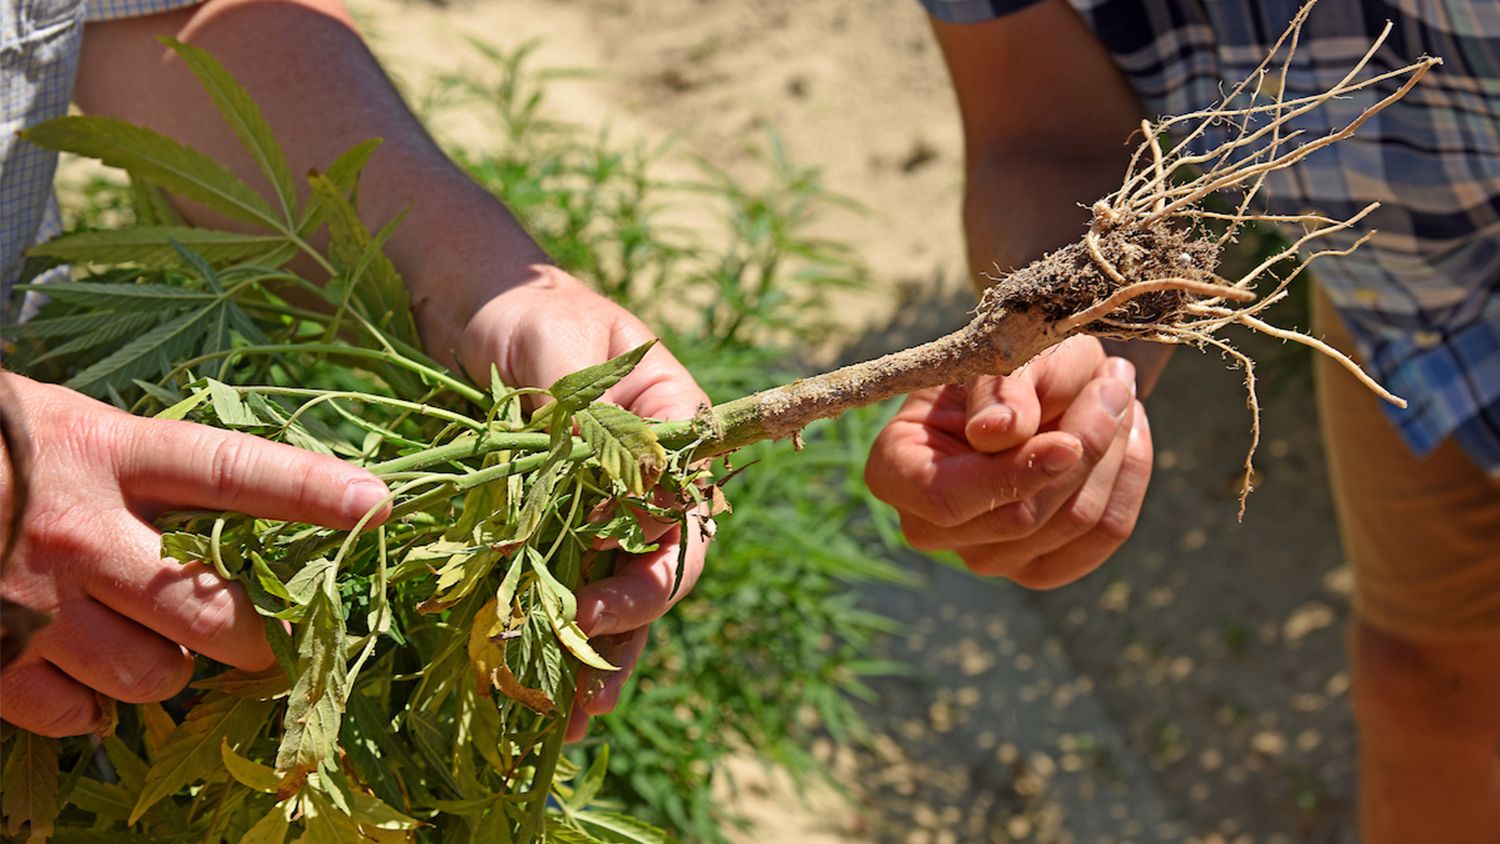 Extension specialists point out disease in hemp crop